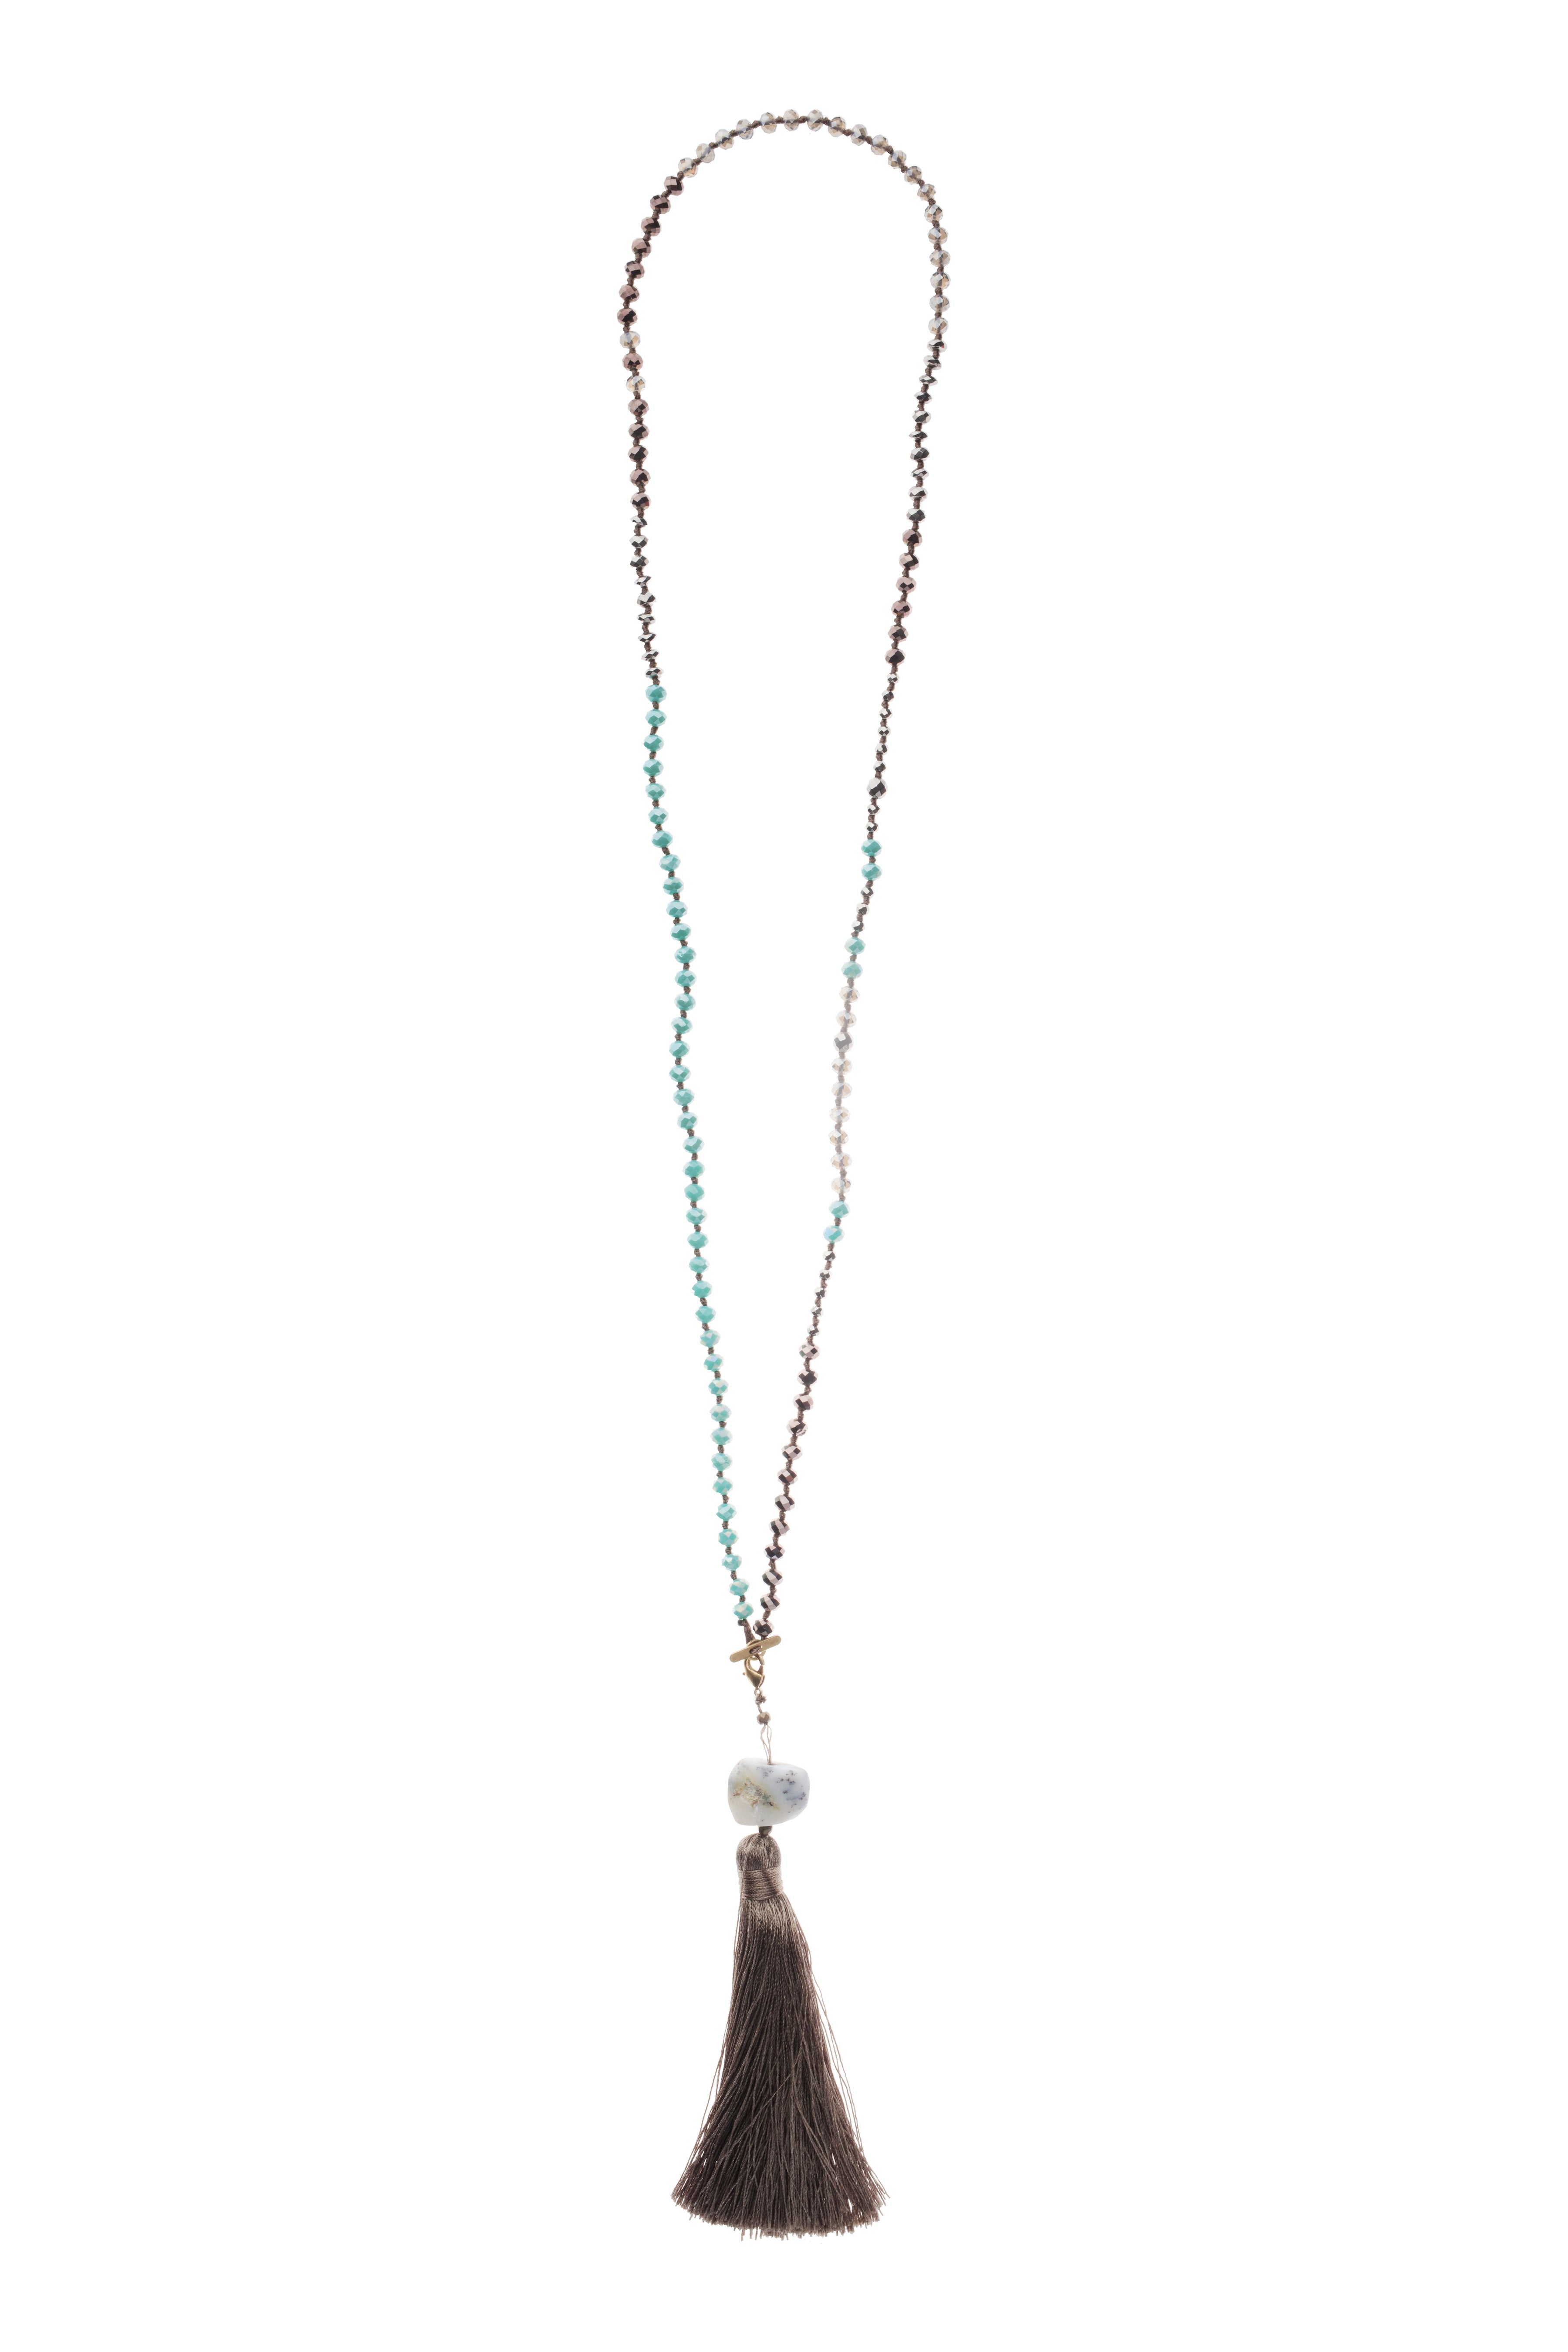 Hand-Knotted Crystal Necklace with Stone + Tassel